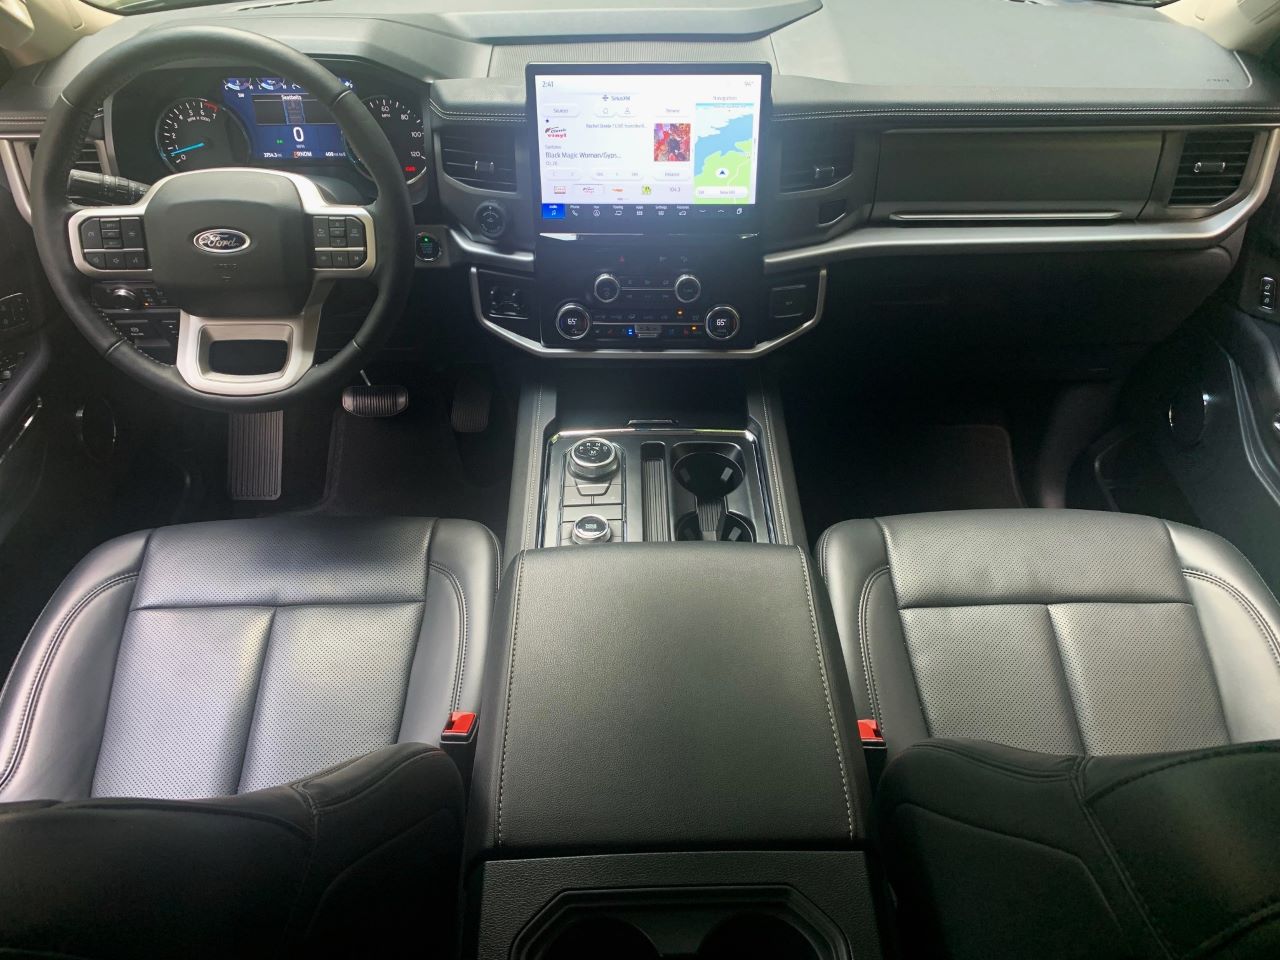 2022 Ford Expedition dashboard